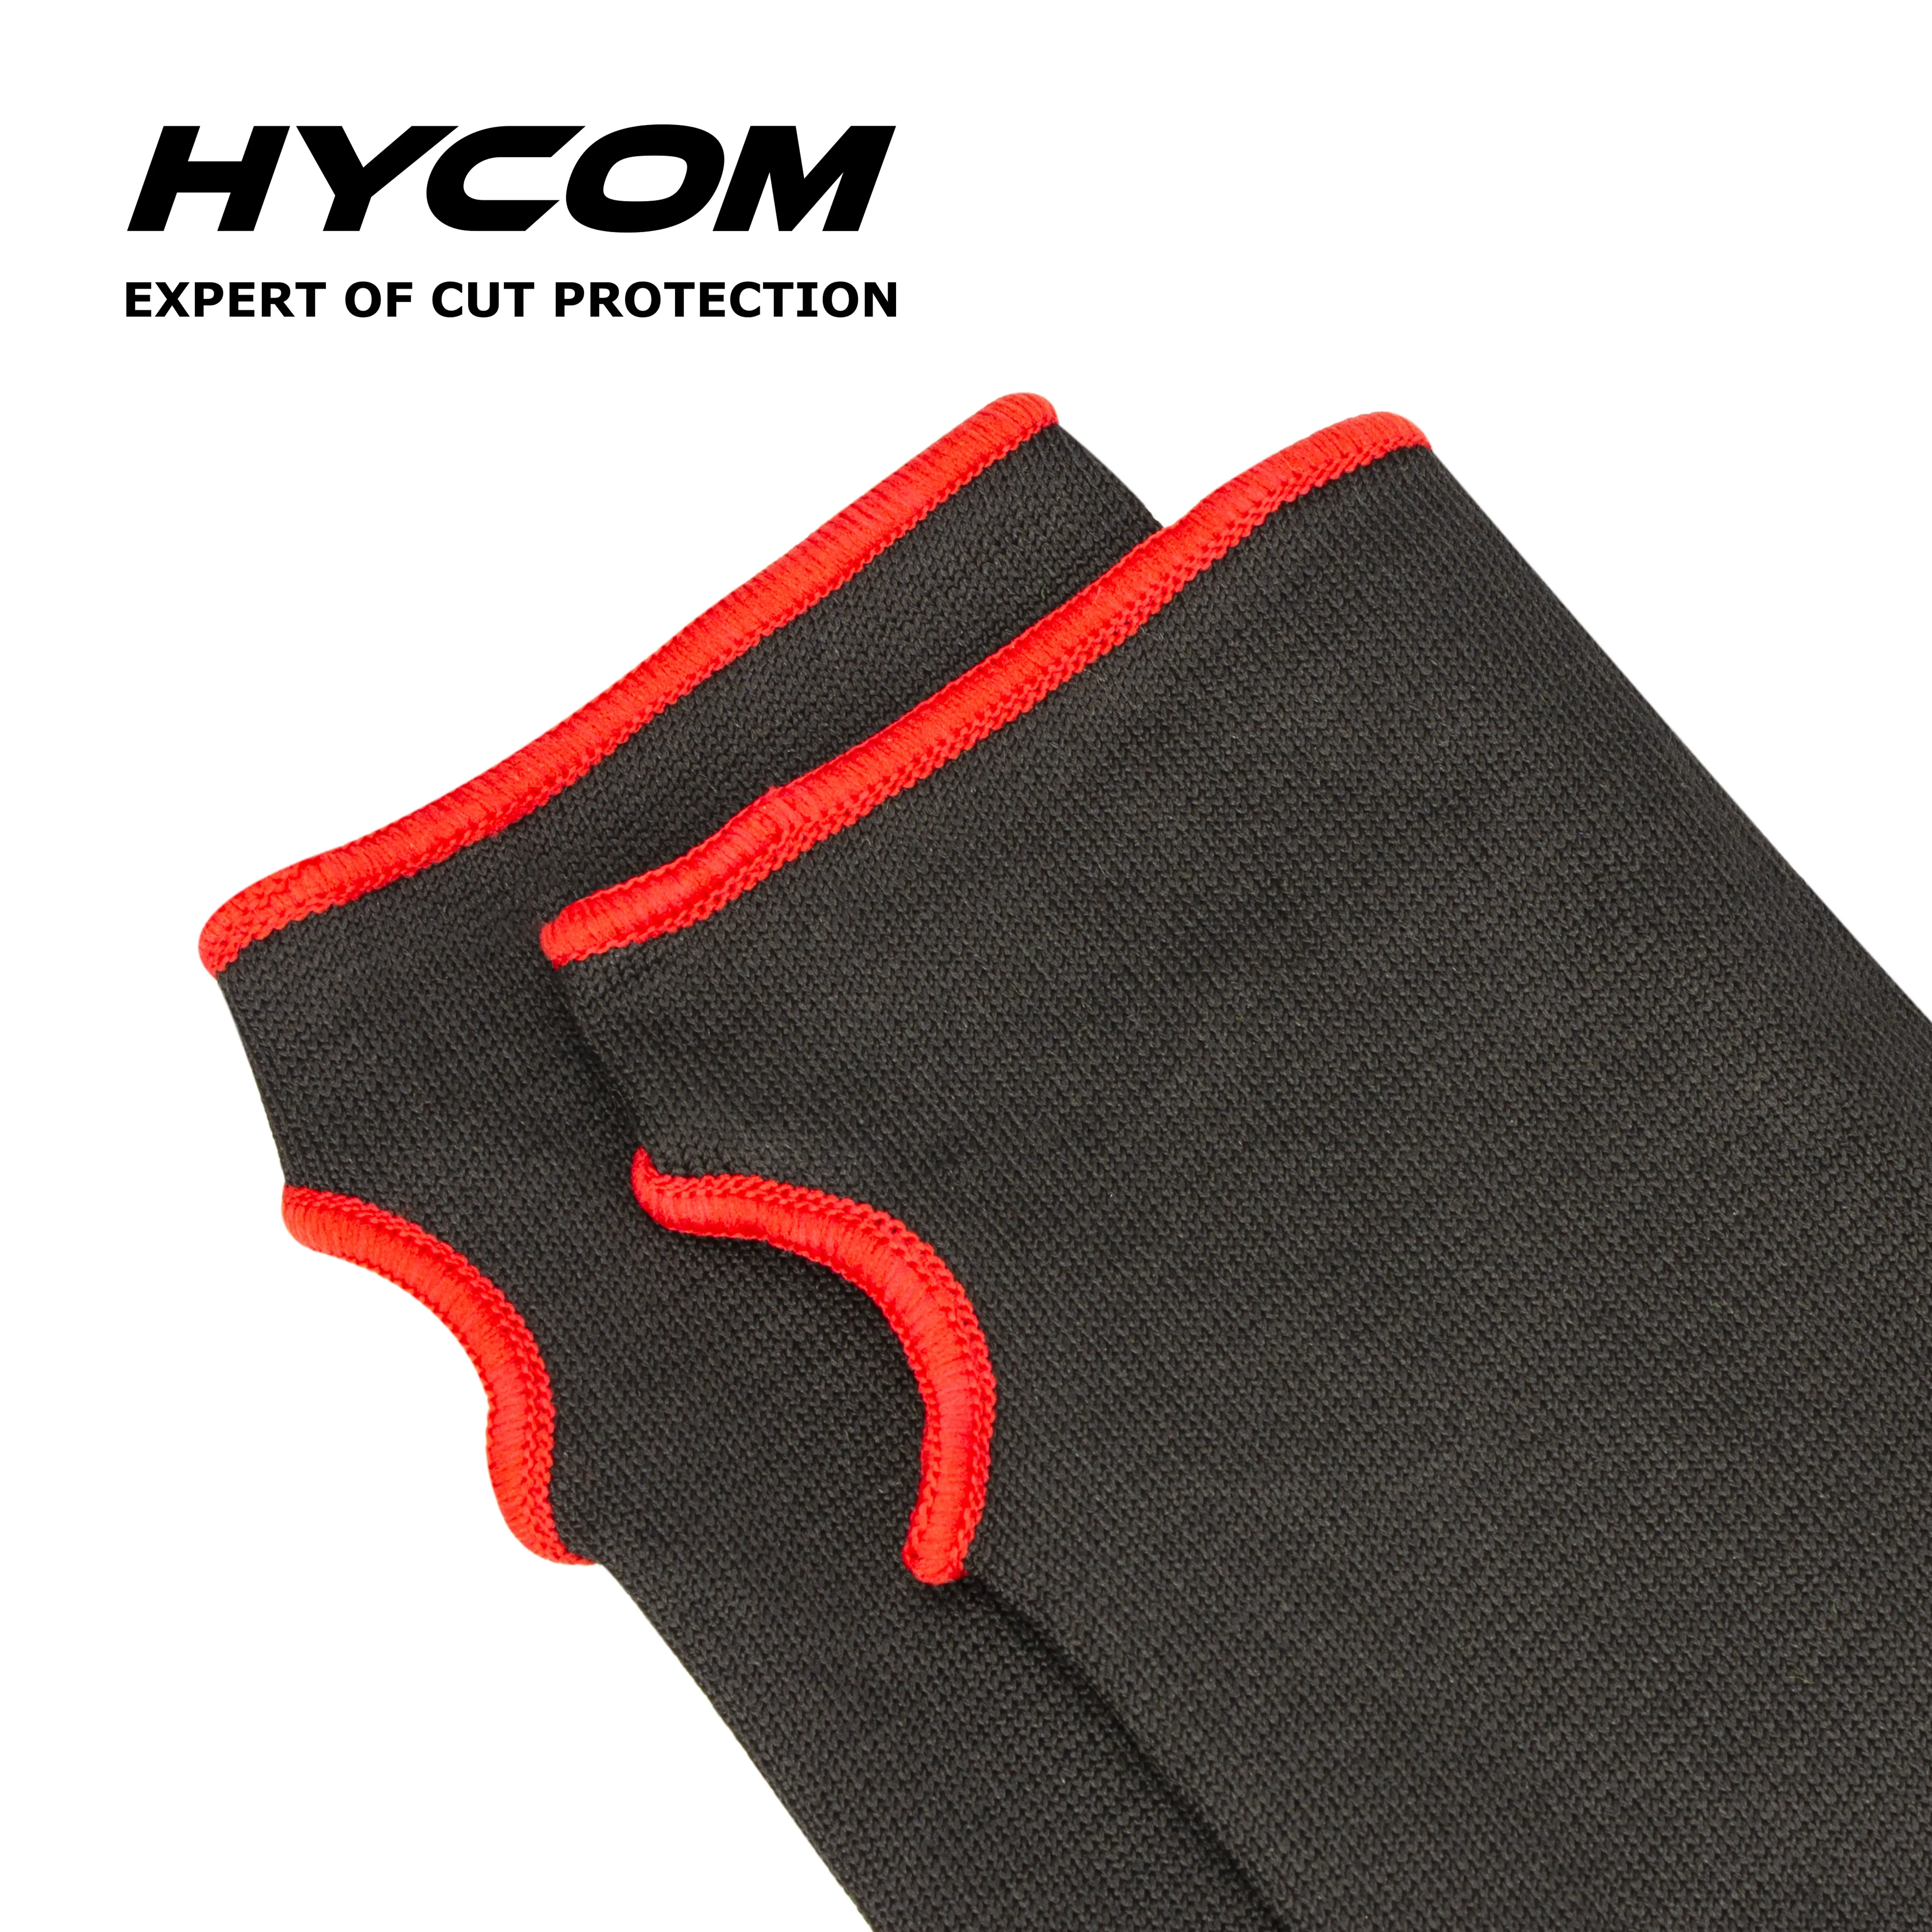 18-Inch Cut Resistant Knit Sleeves grade 5 Anti-cut arm cover for Outdoor Work Protective Hands